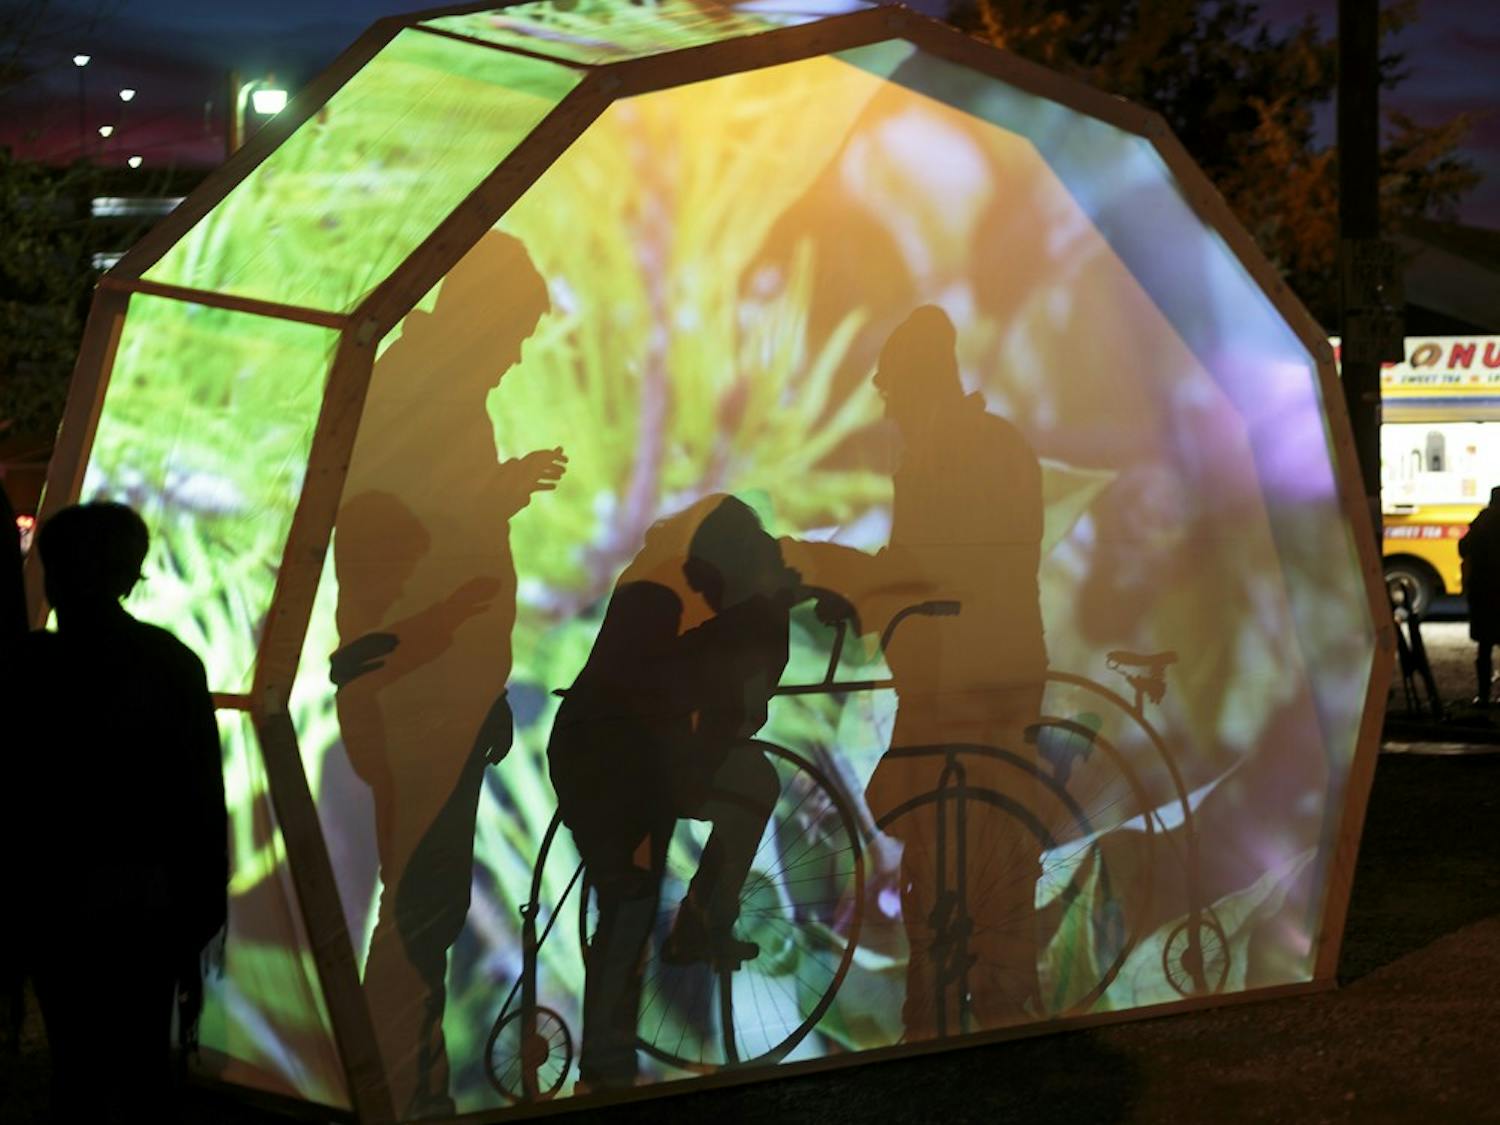 Carrboro hosted Shimmer, a one-night art exhibition centered around light, on Friday night.